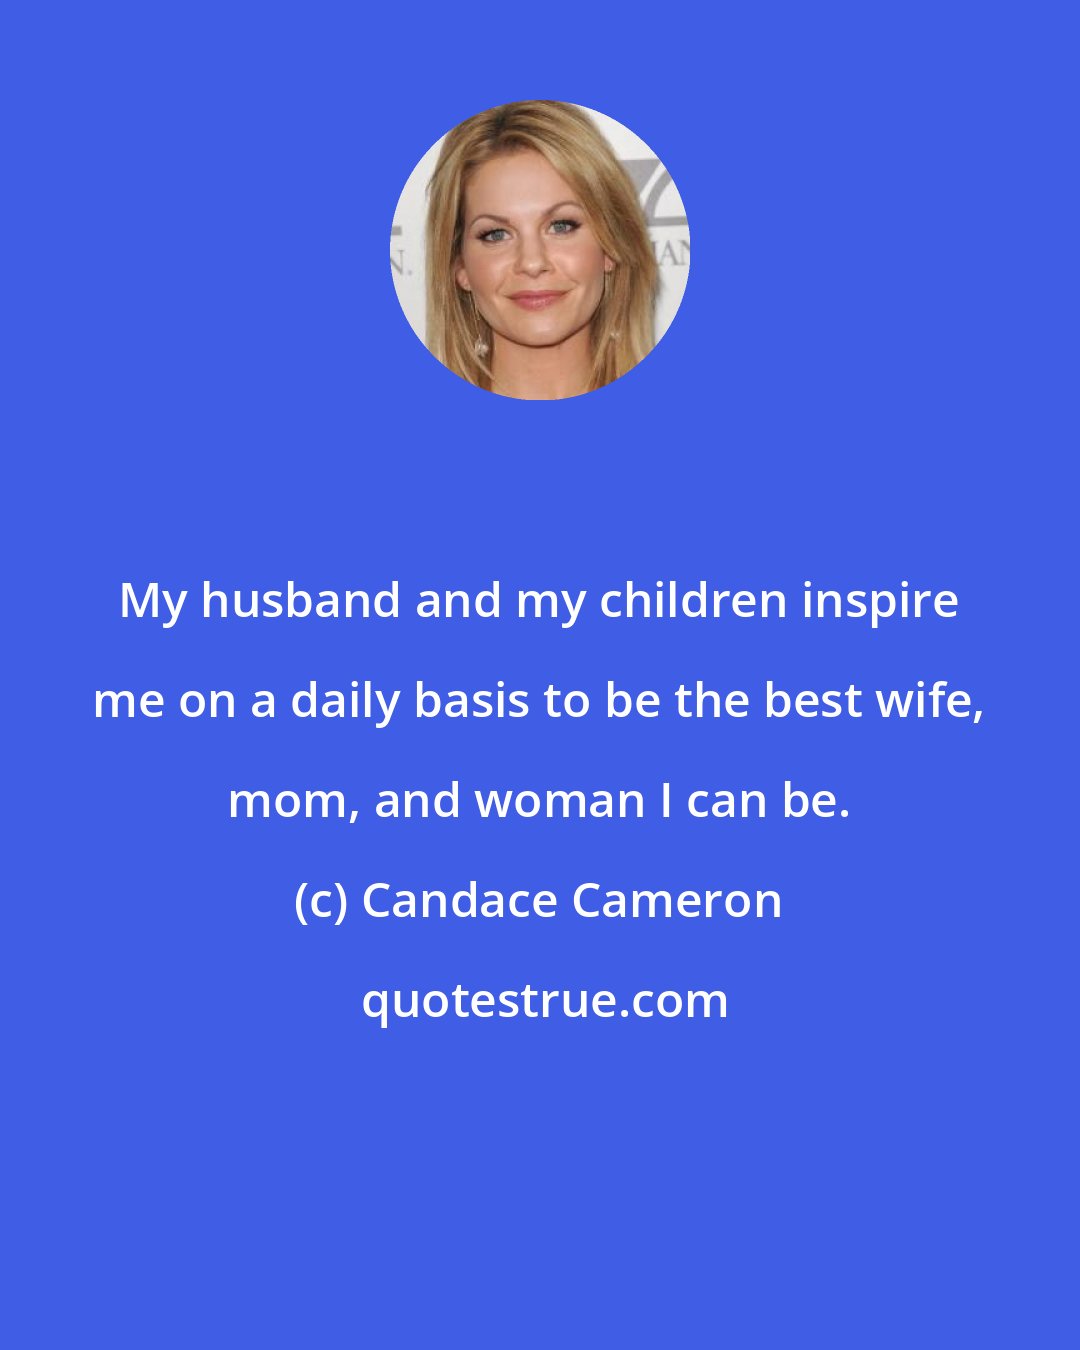 Candace Cameron: My husband and my children inspire me on a daily basis to be the best wife, mom, and woman I can be.